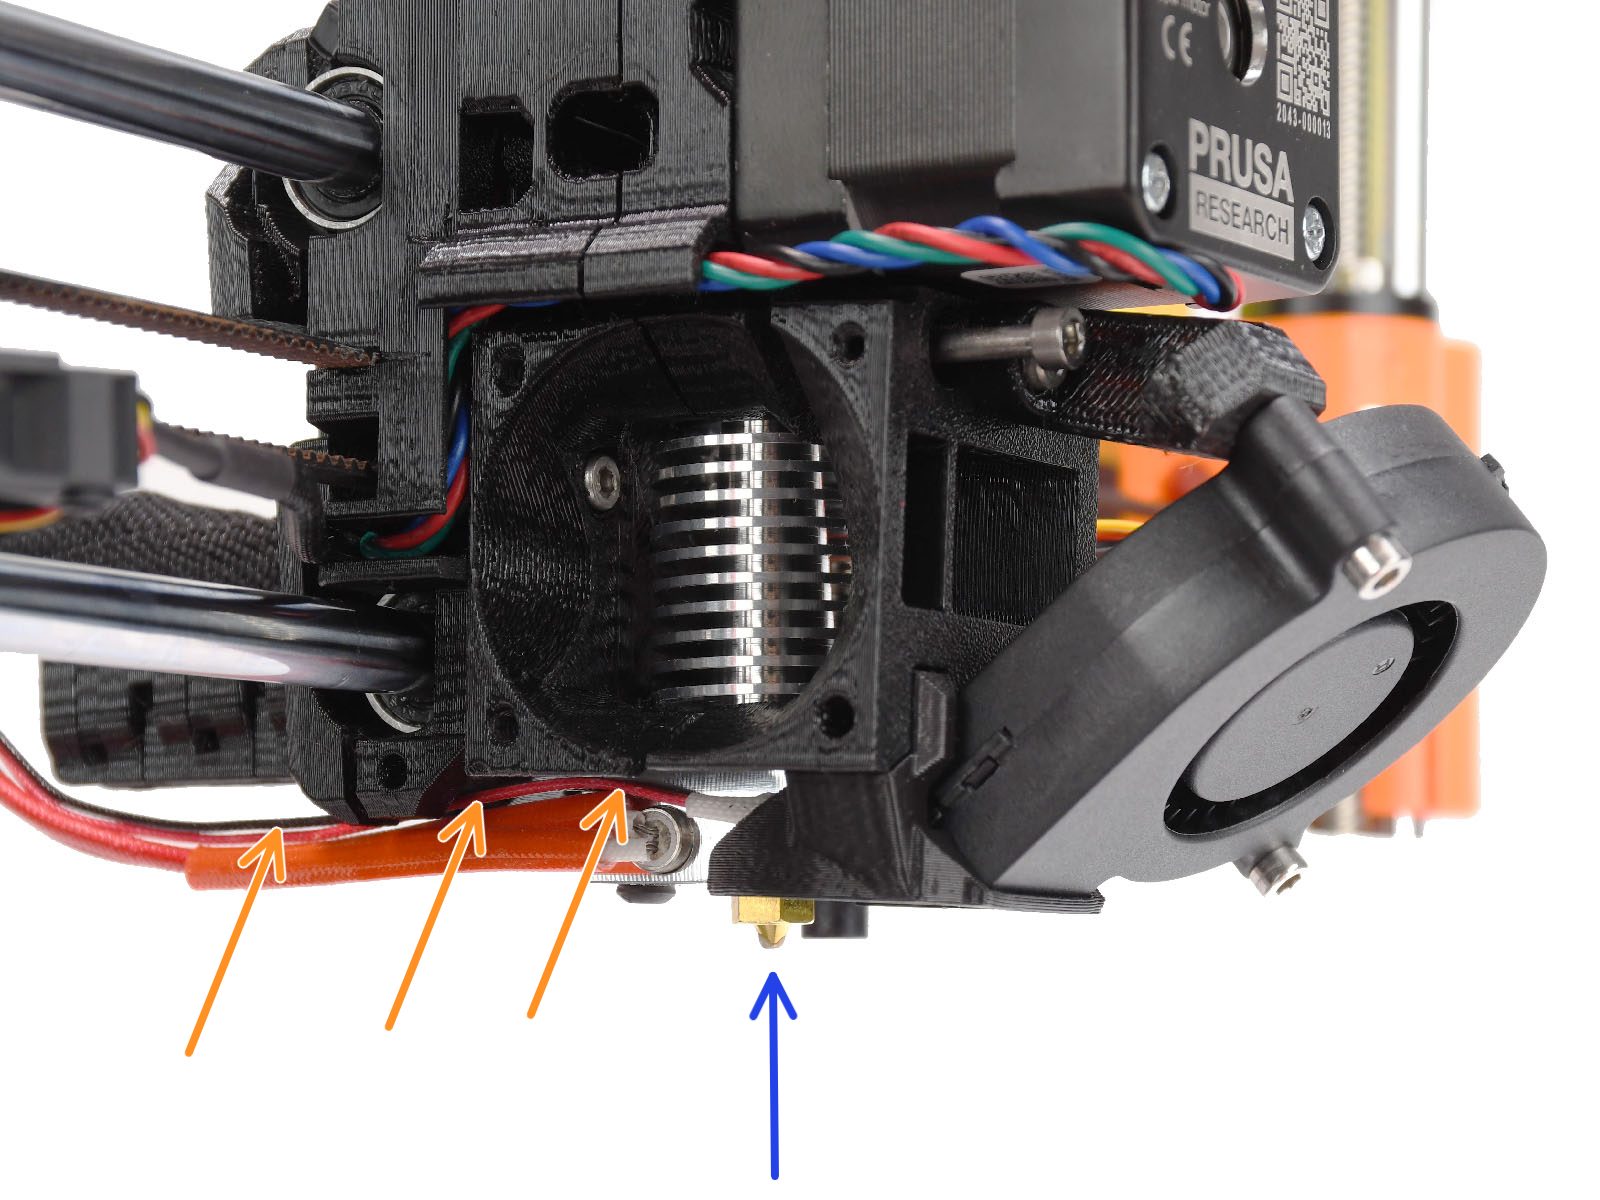 Extruder reassembly (Part 2)